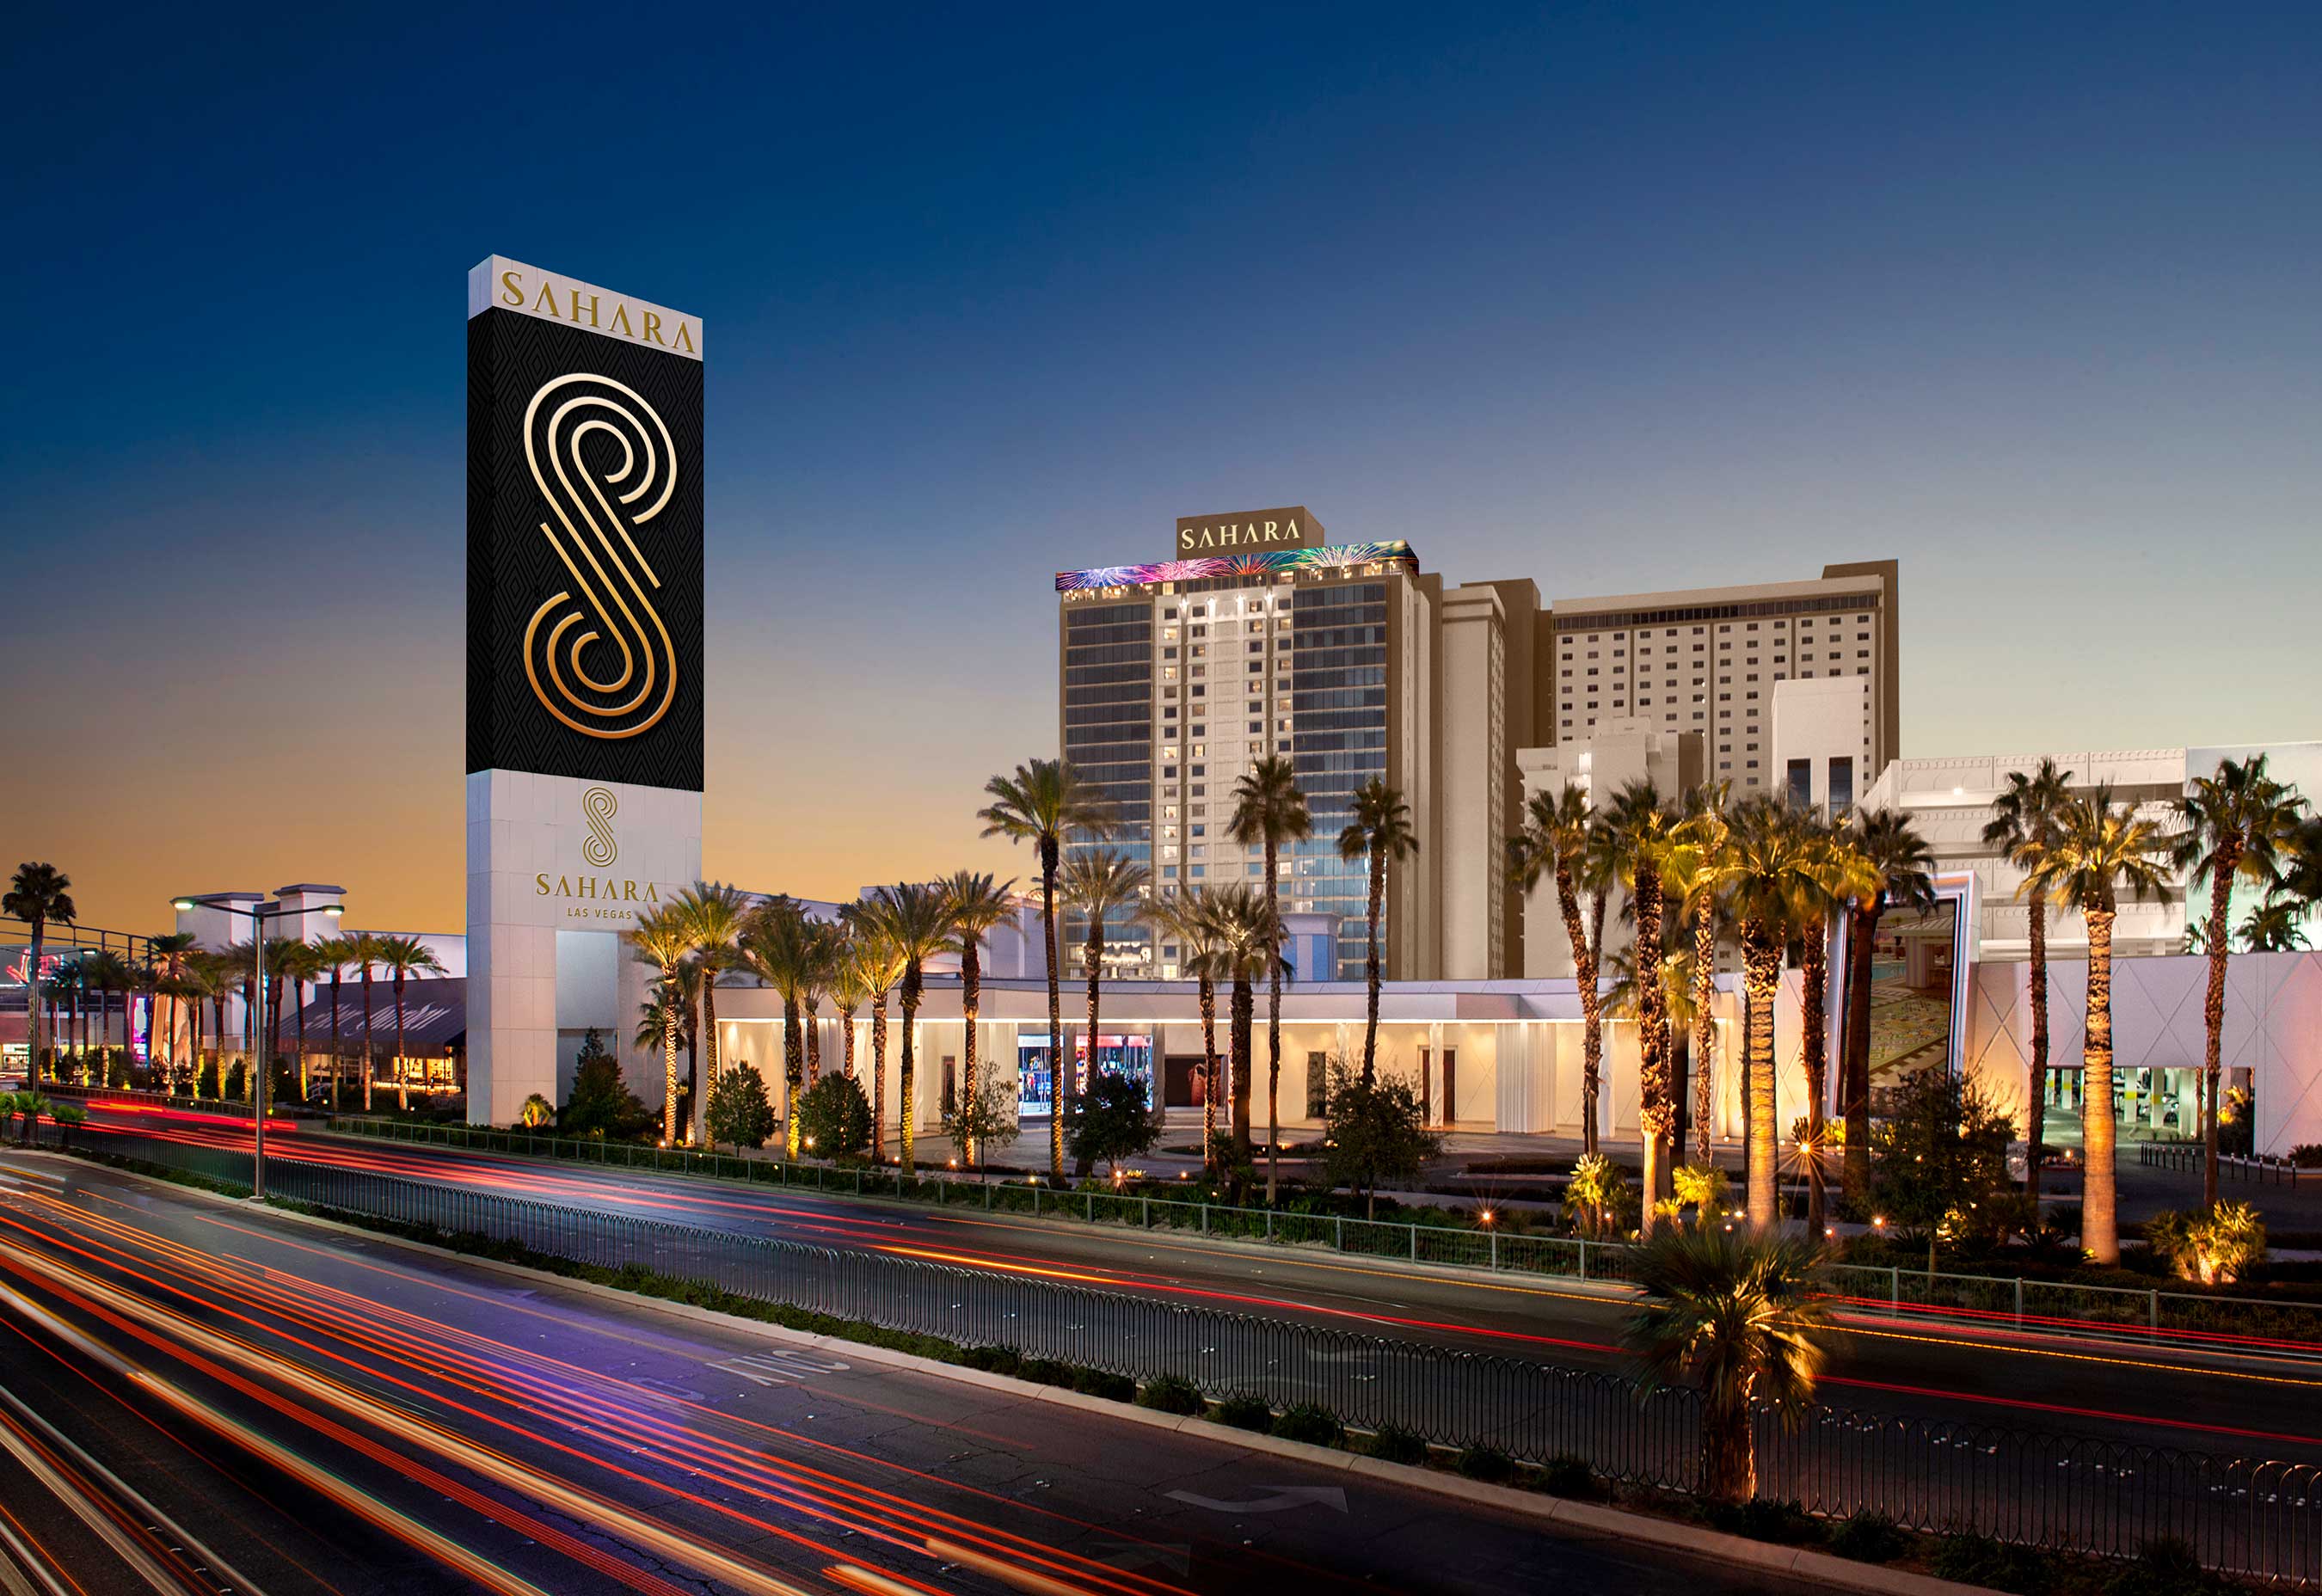 SAHARA Las Vegas launches series of digital shorts depicting the remaking of an icon